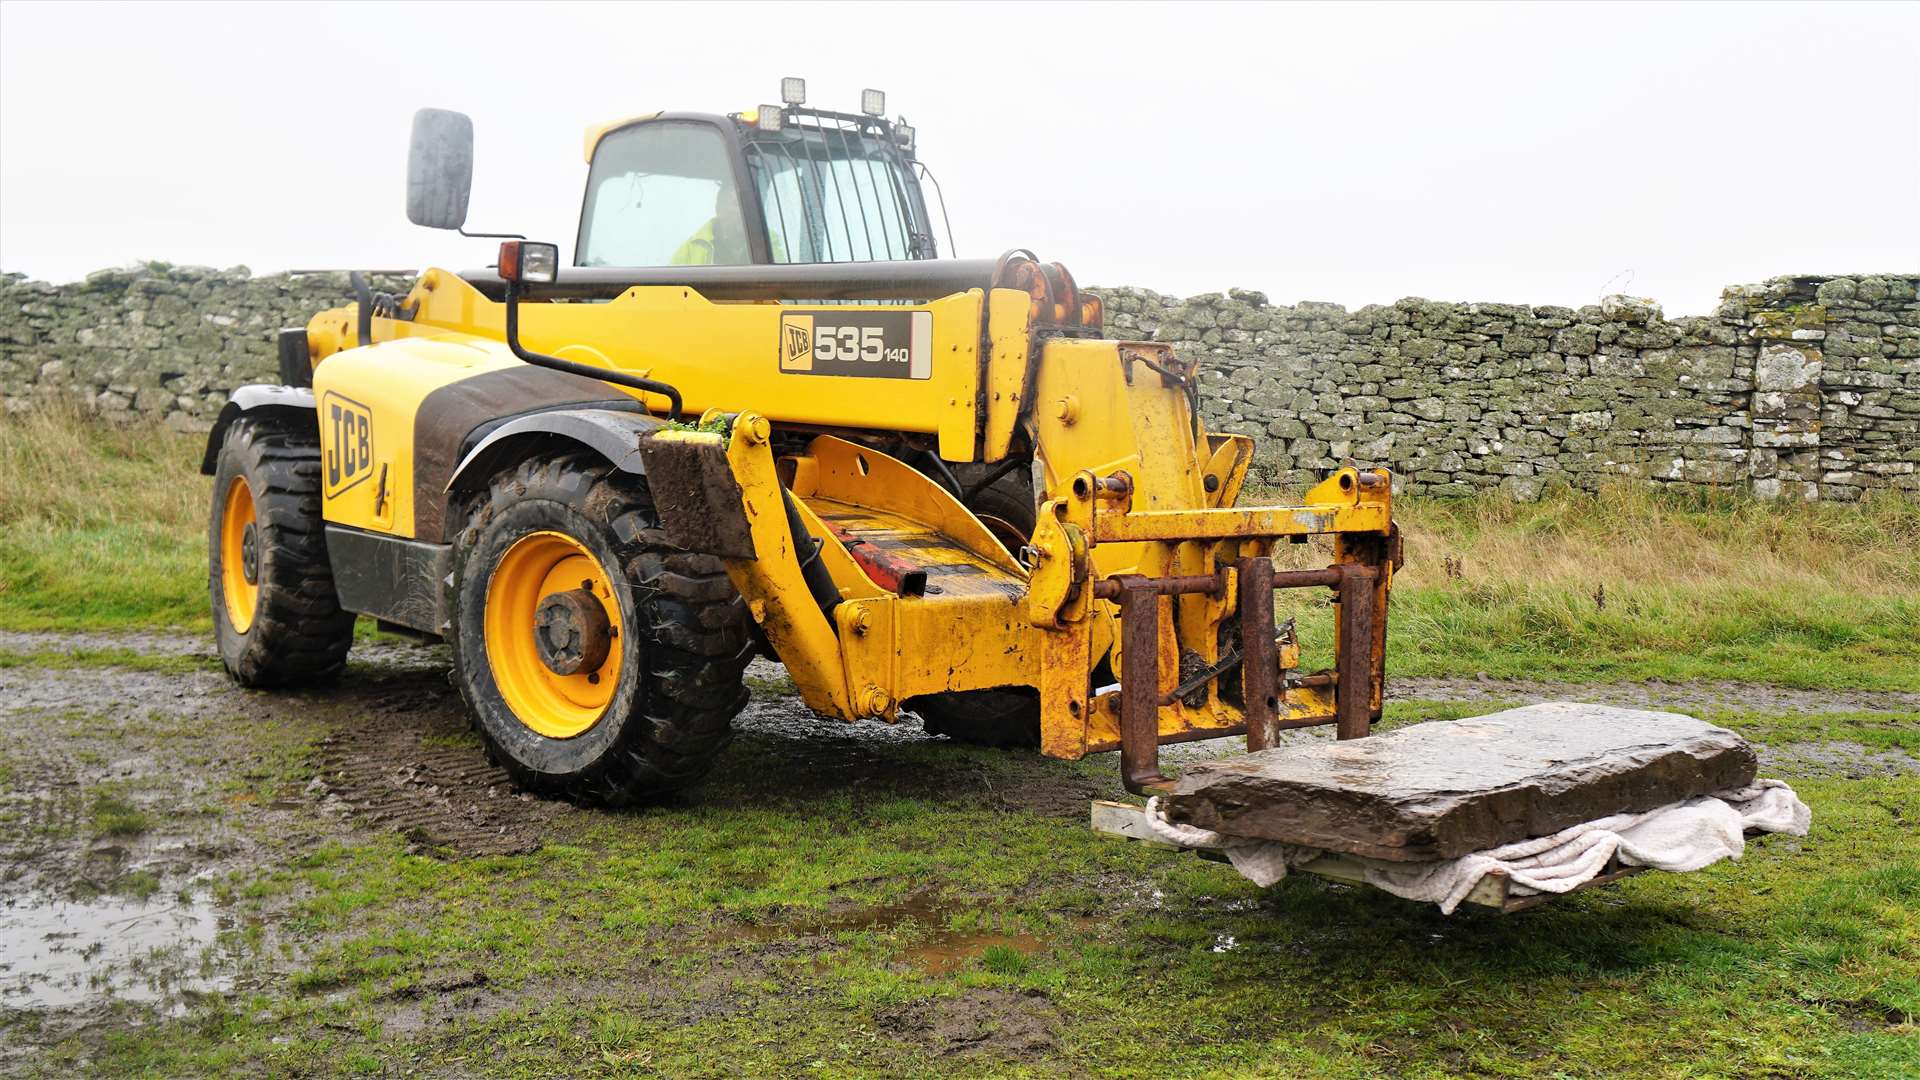 David Dunnett of DD Joinery was asked to help remove the slab and used his JCB to lift it from the graveyard. Picture: DGS